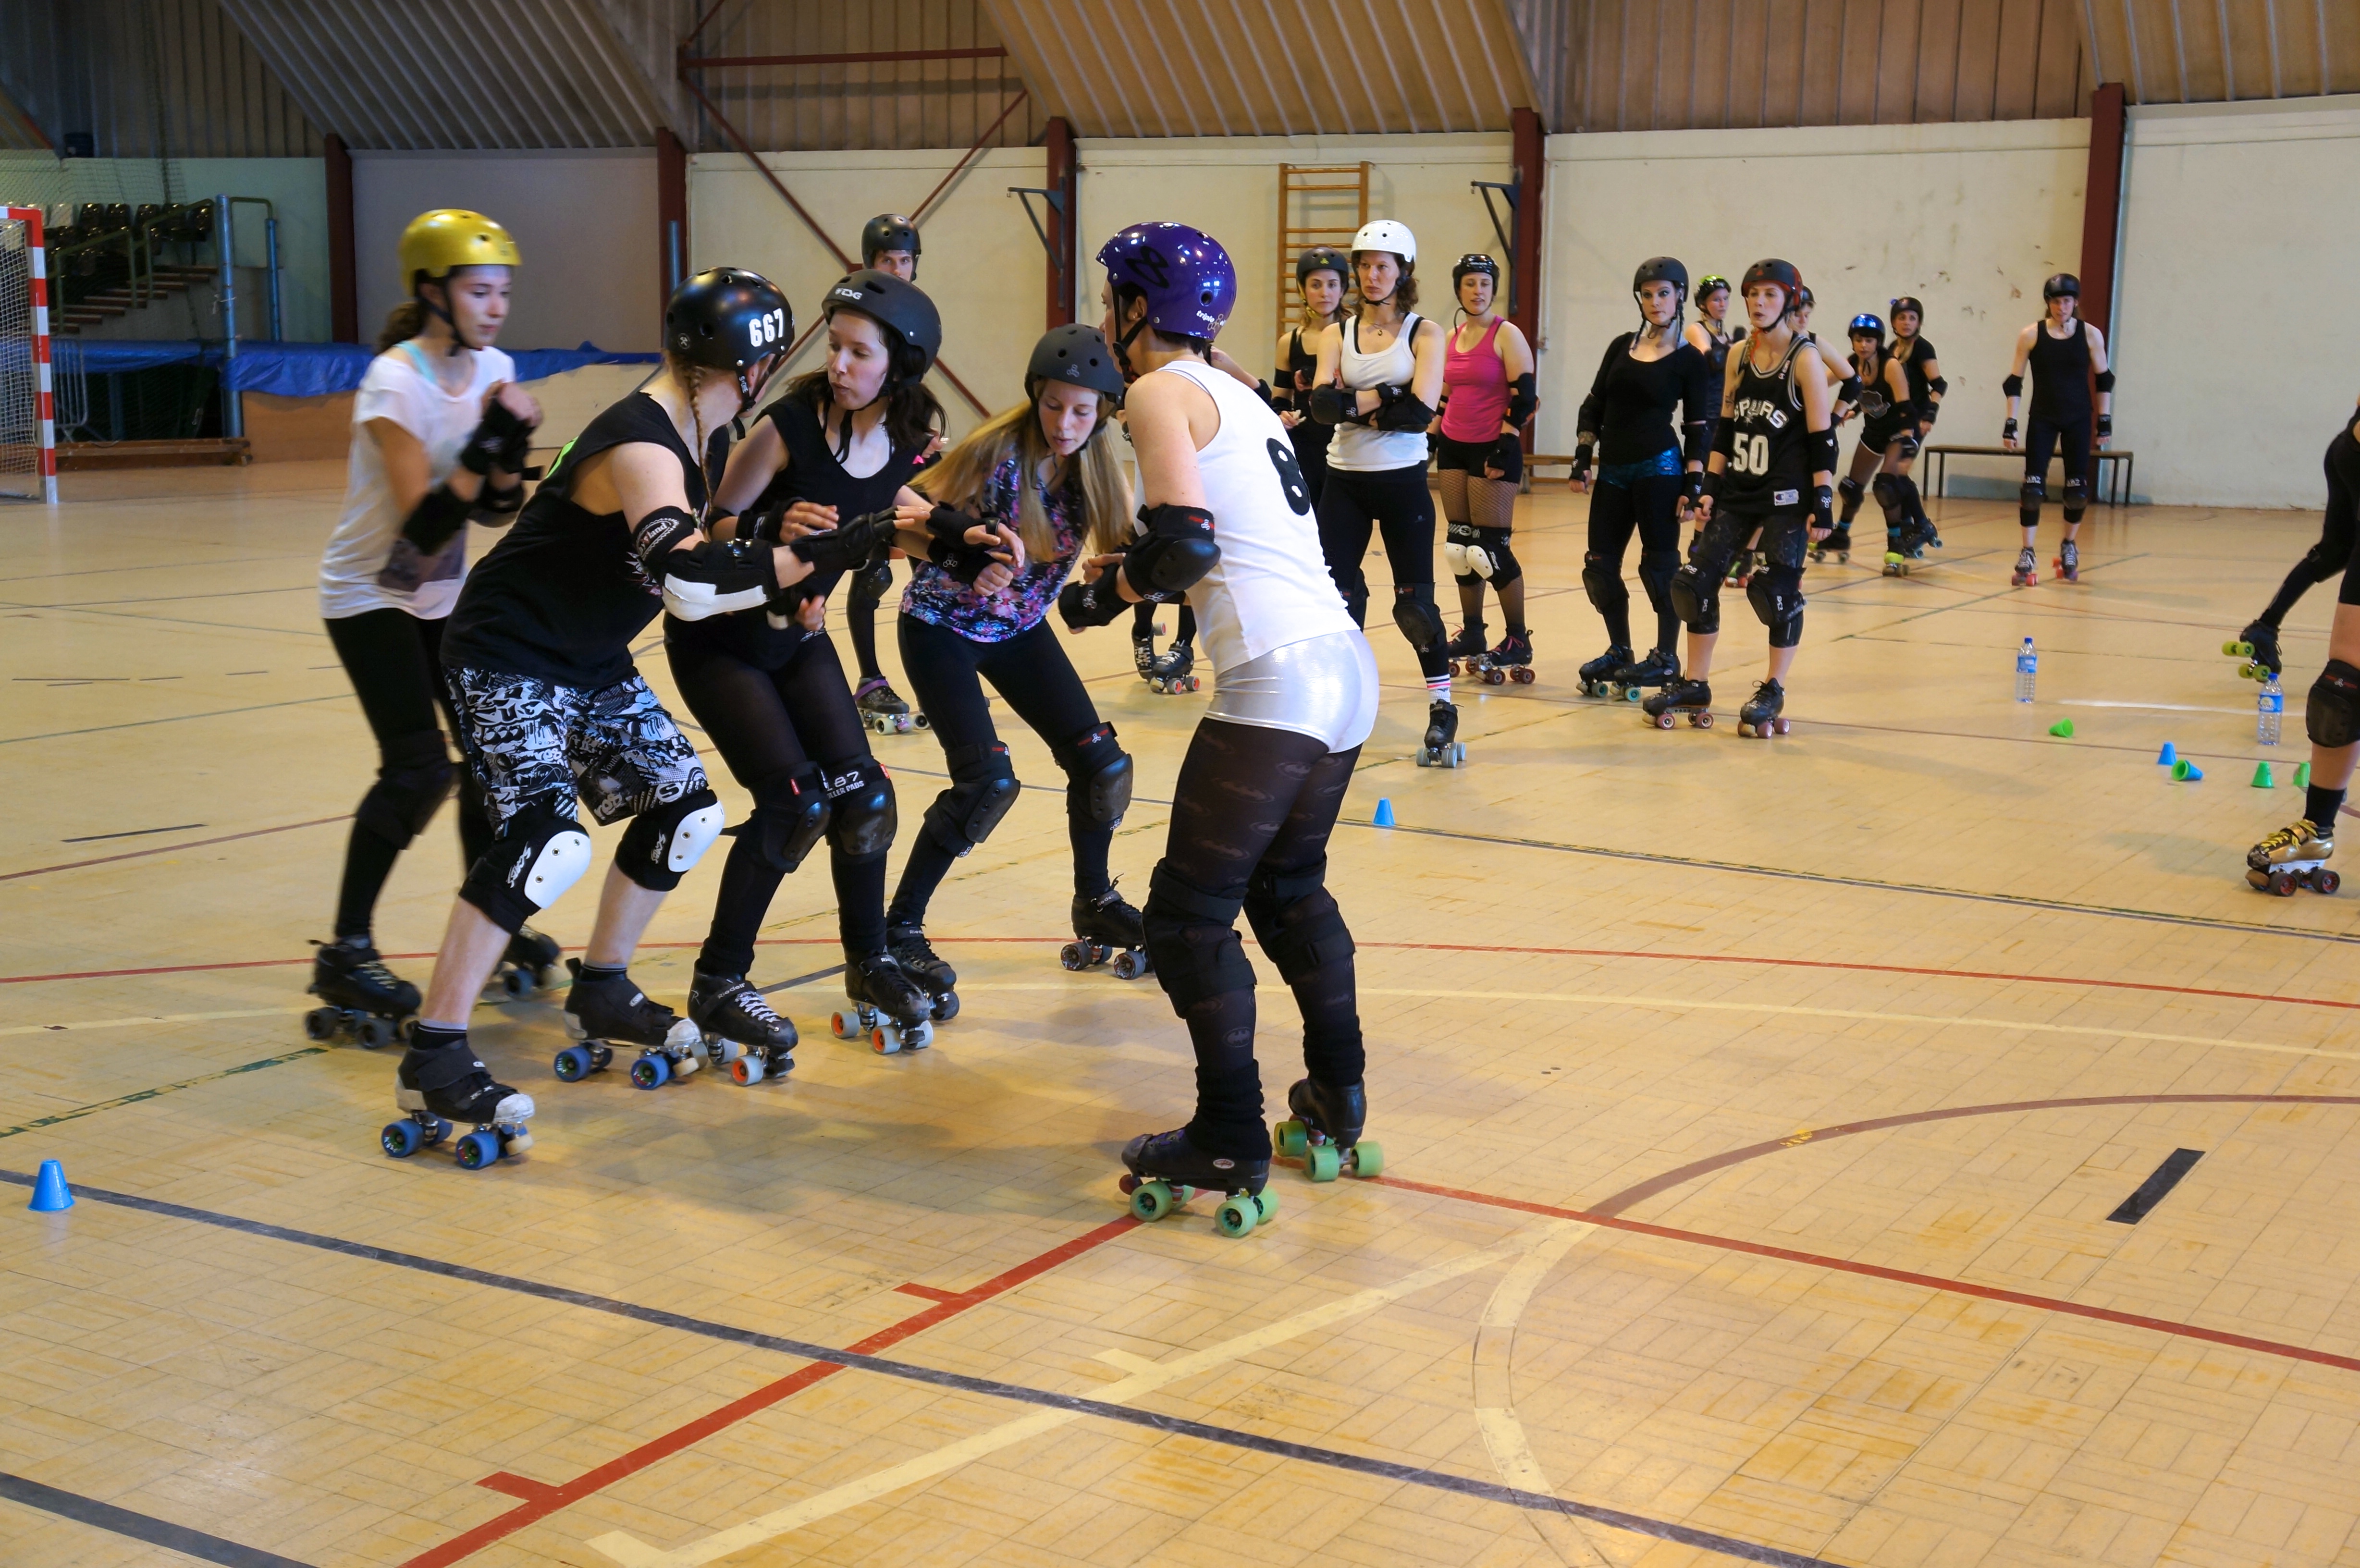 Les Dissidentes Roller Derby Liège/ Pic by 1FDLE.